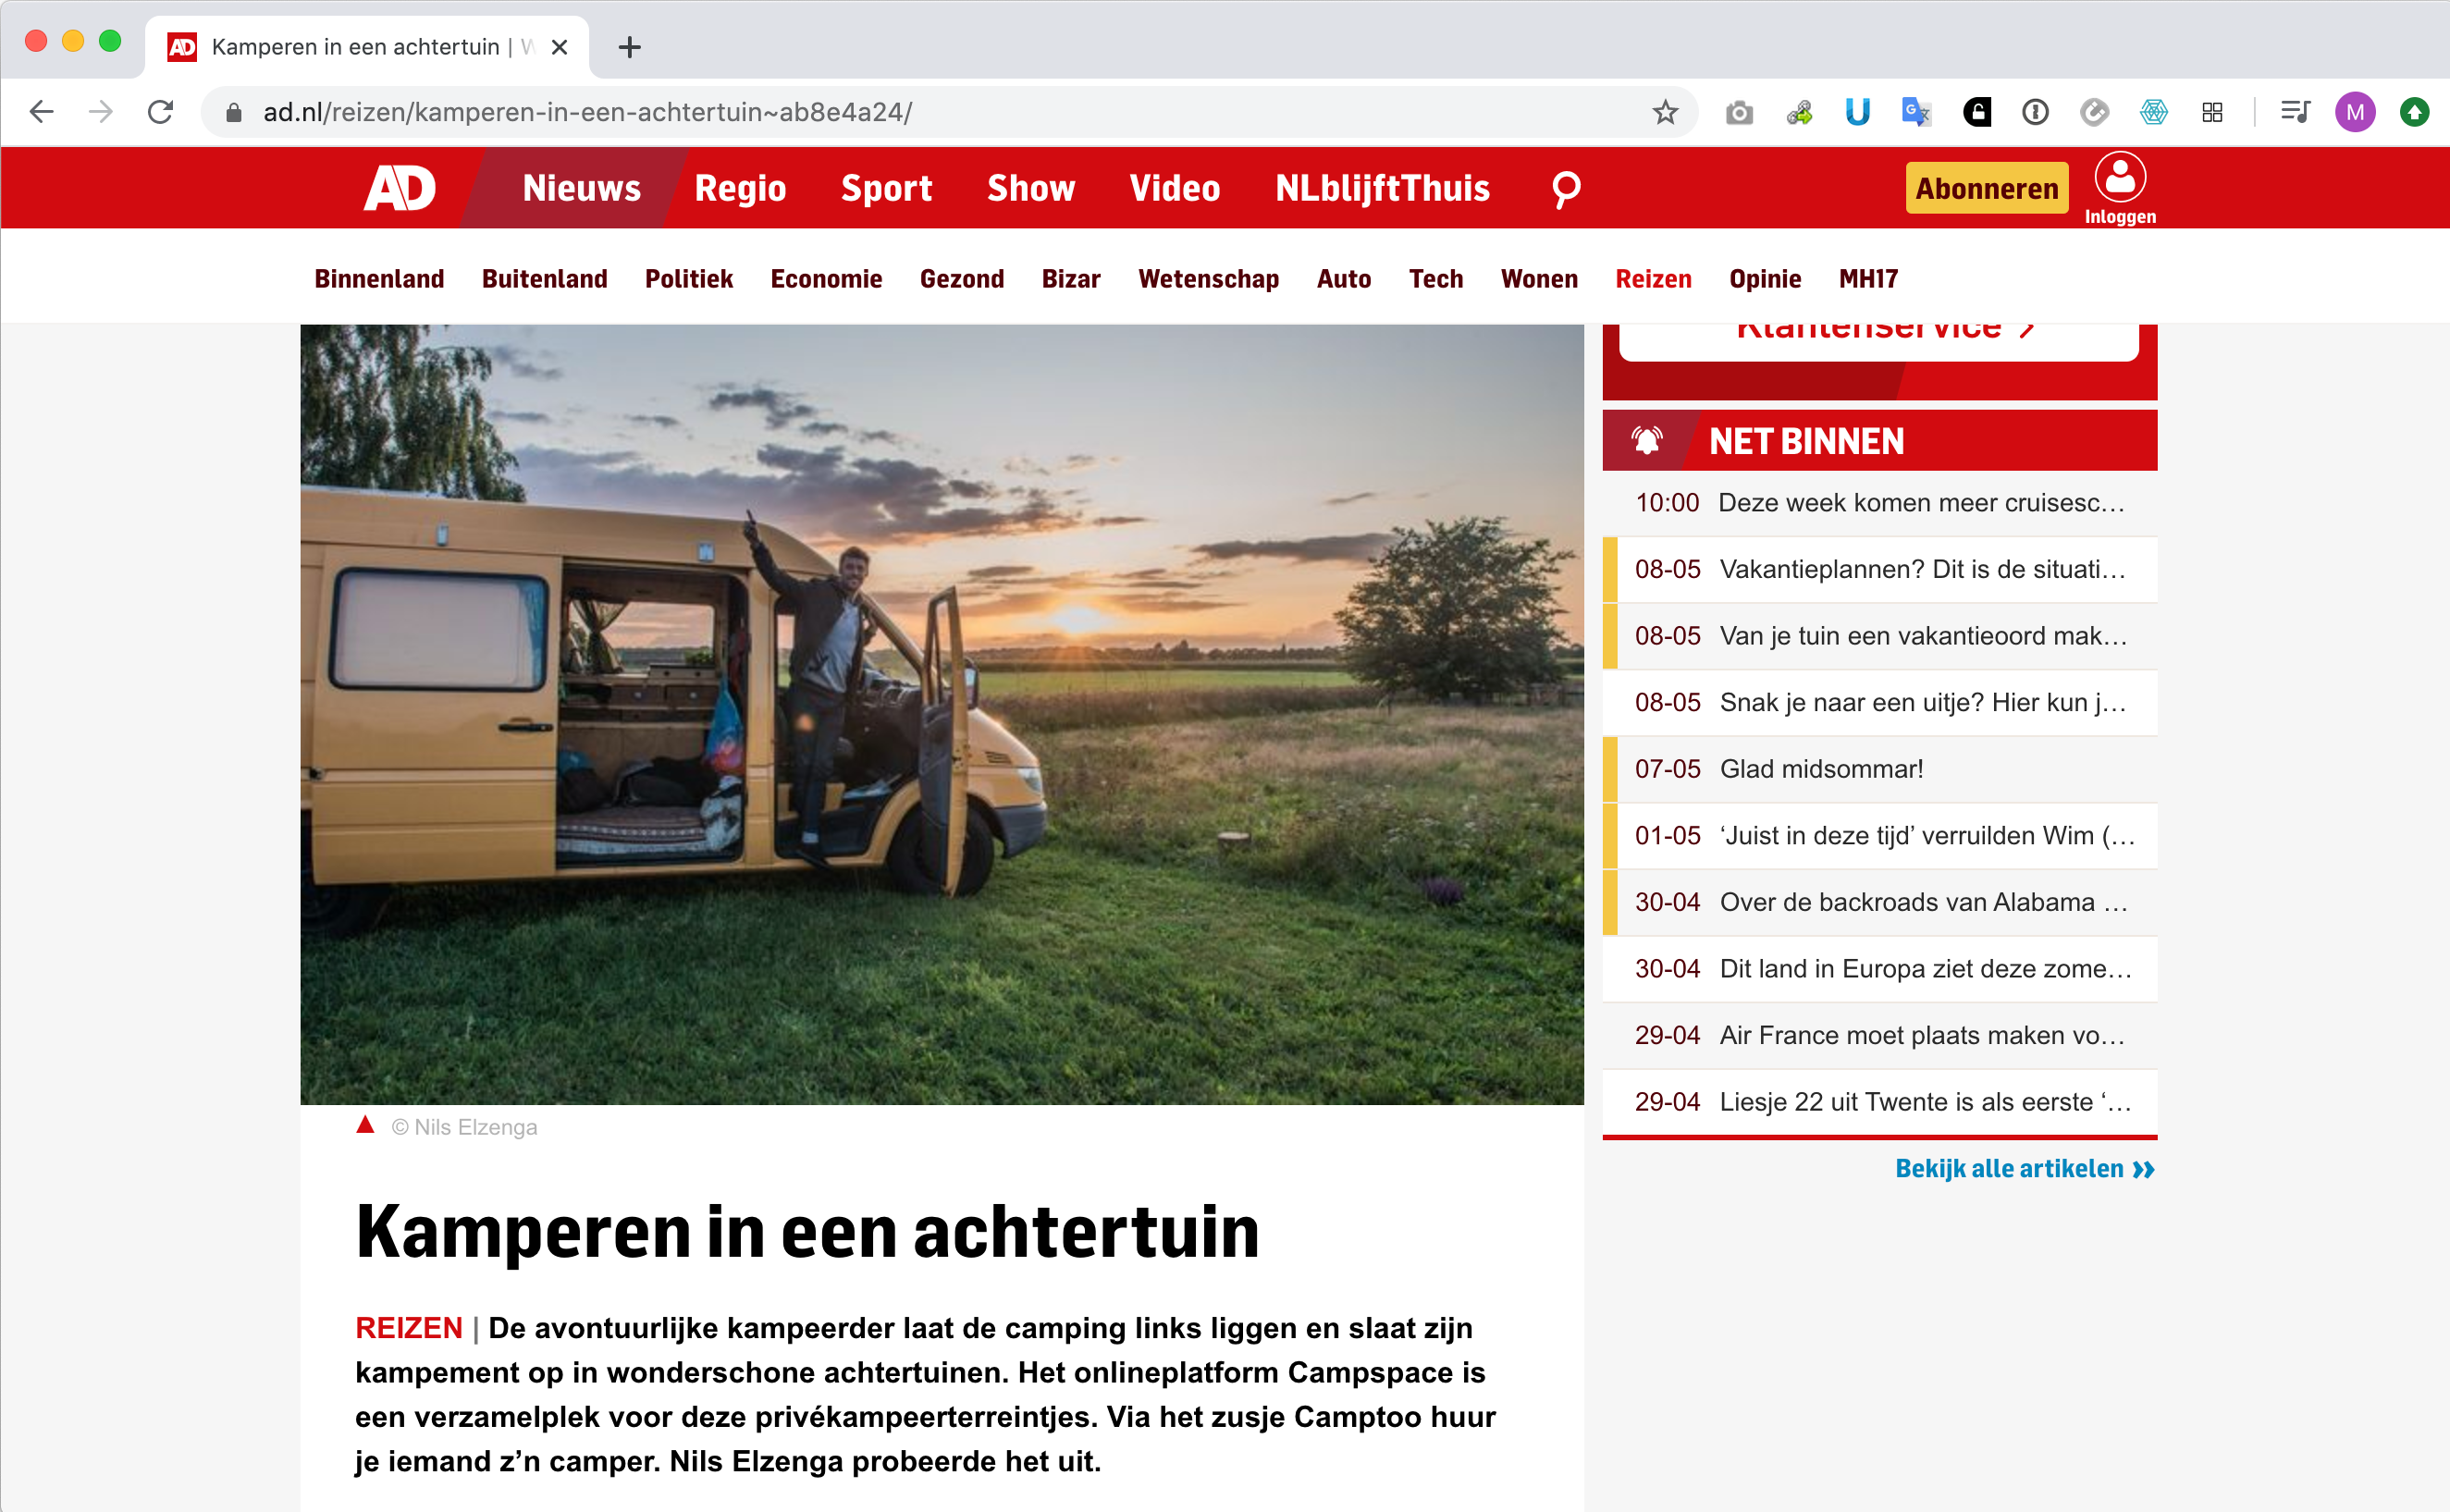 March 5, 2020 — The Algemeen Dagblad on 'Camping in a backyard'